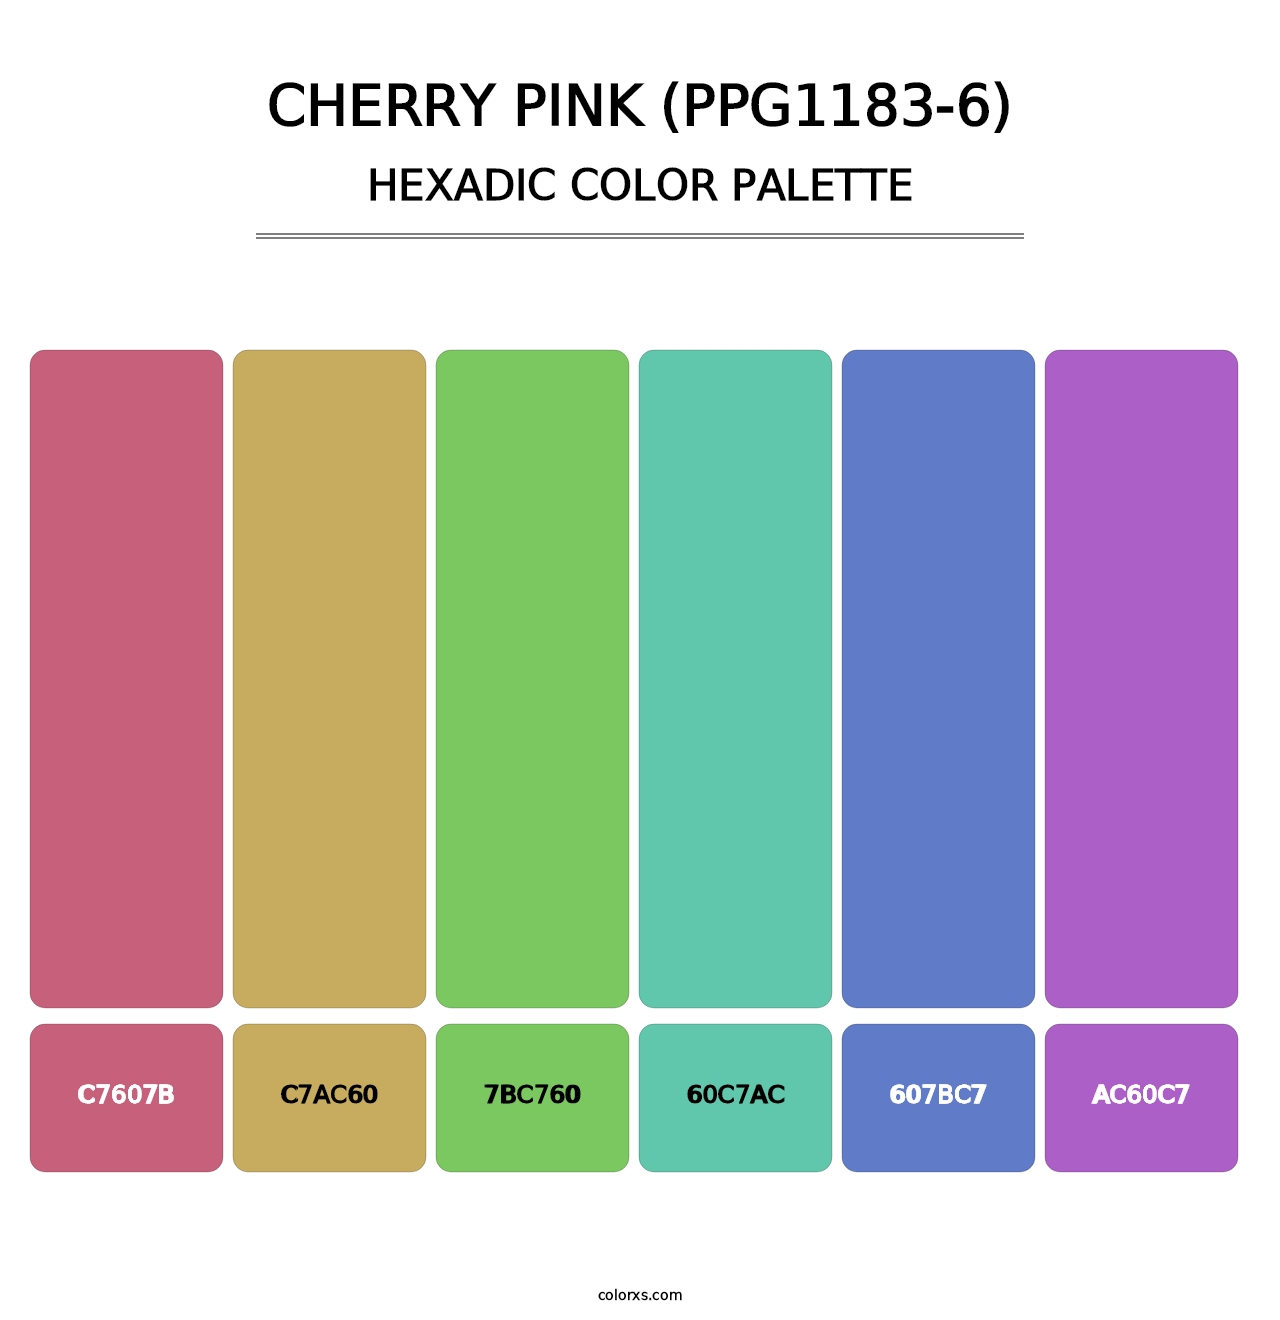 Cherry Pink (PPG1183-6) - Hexadic Color Palette